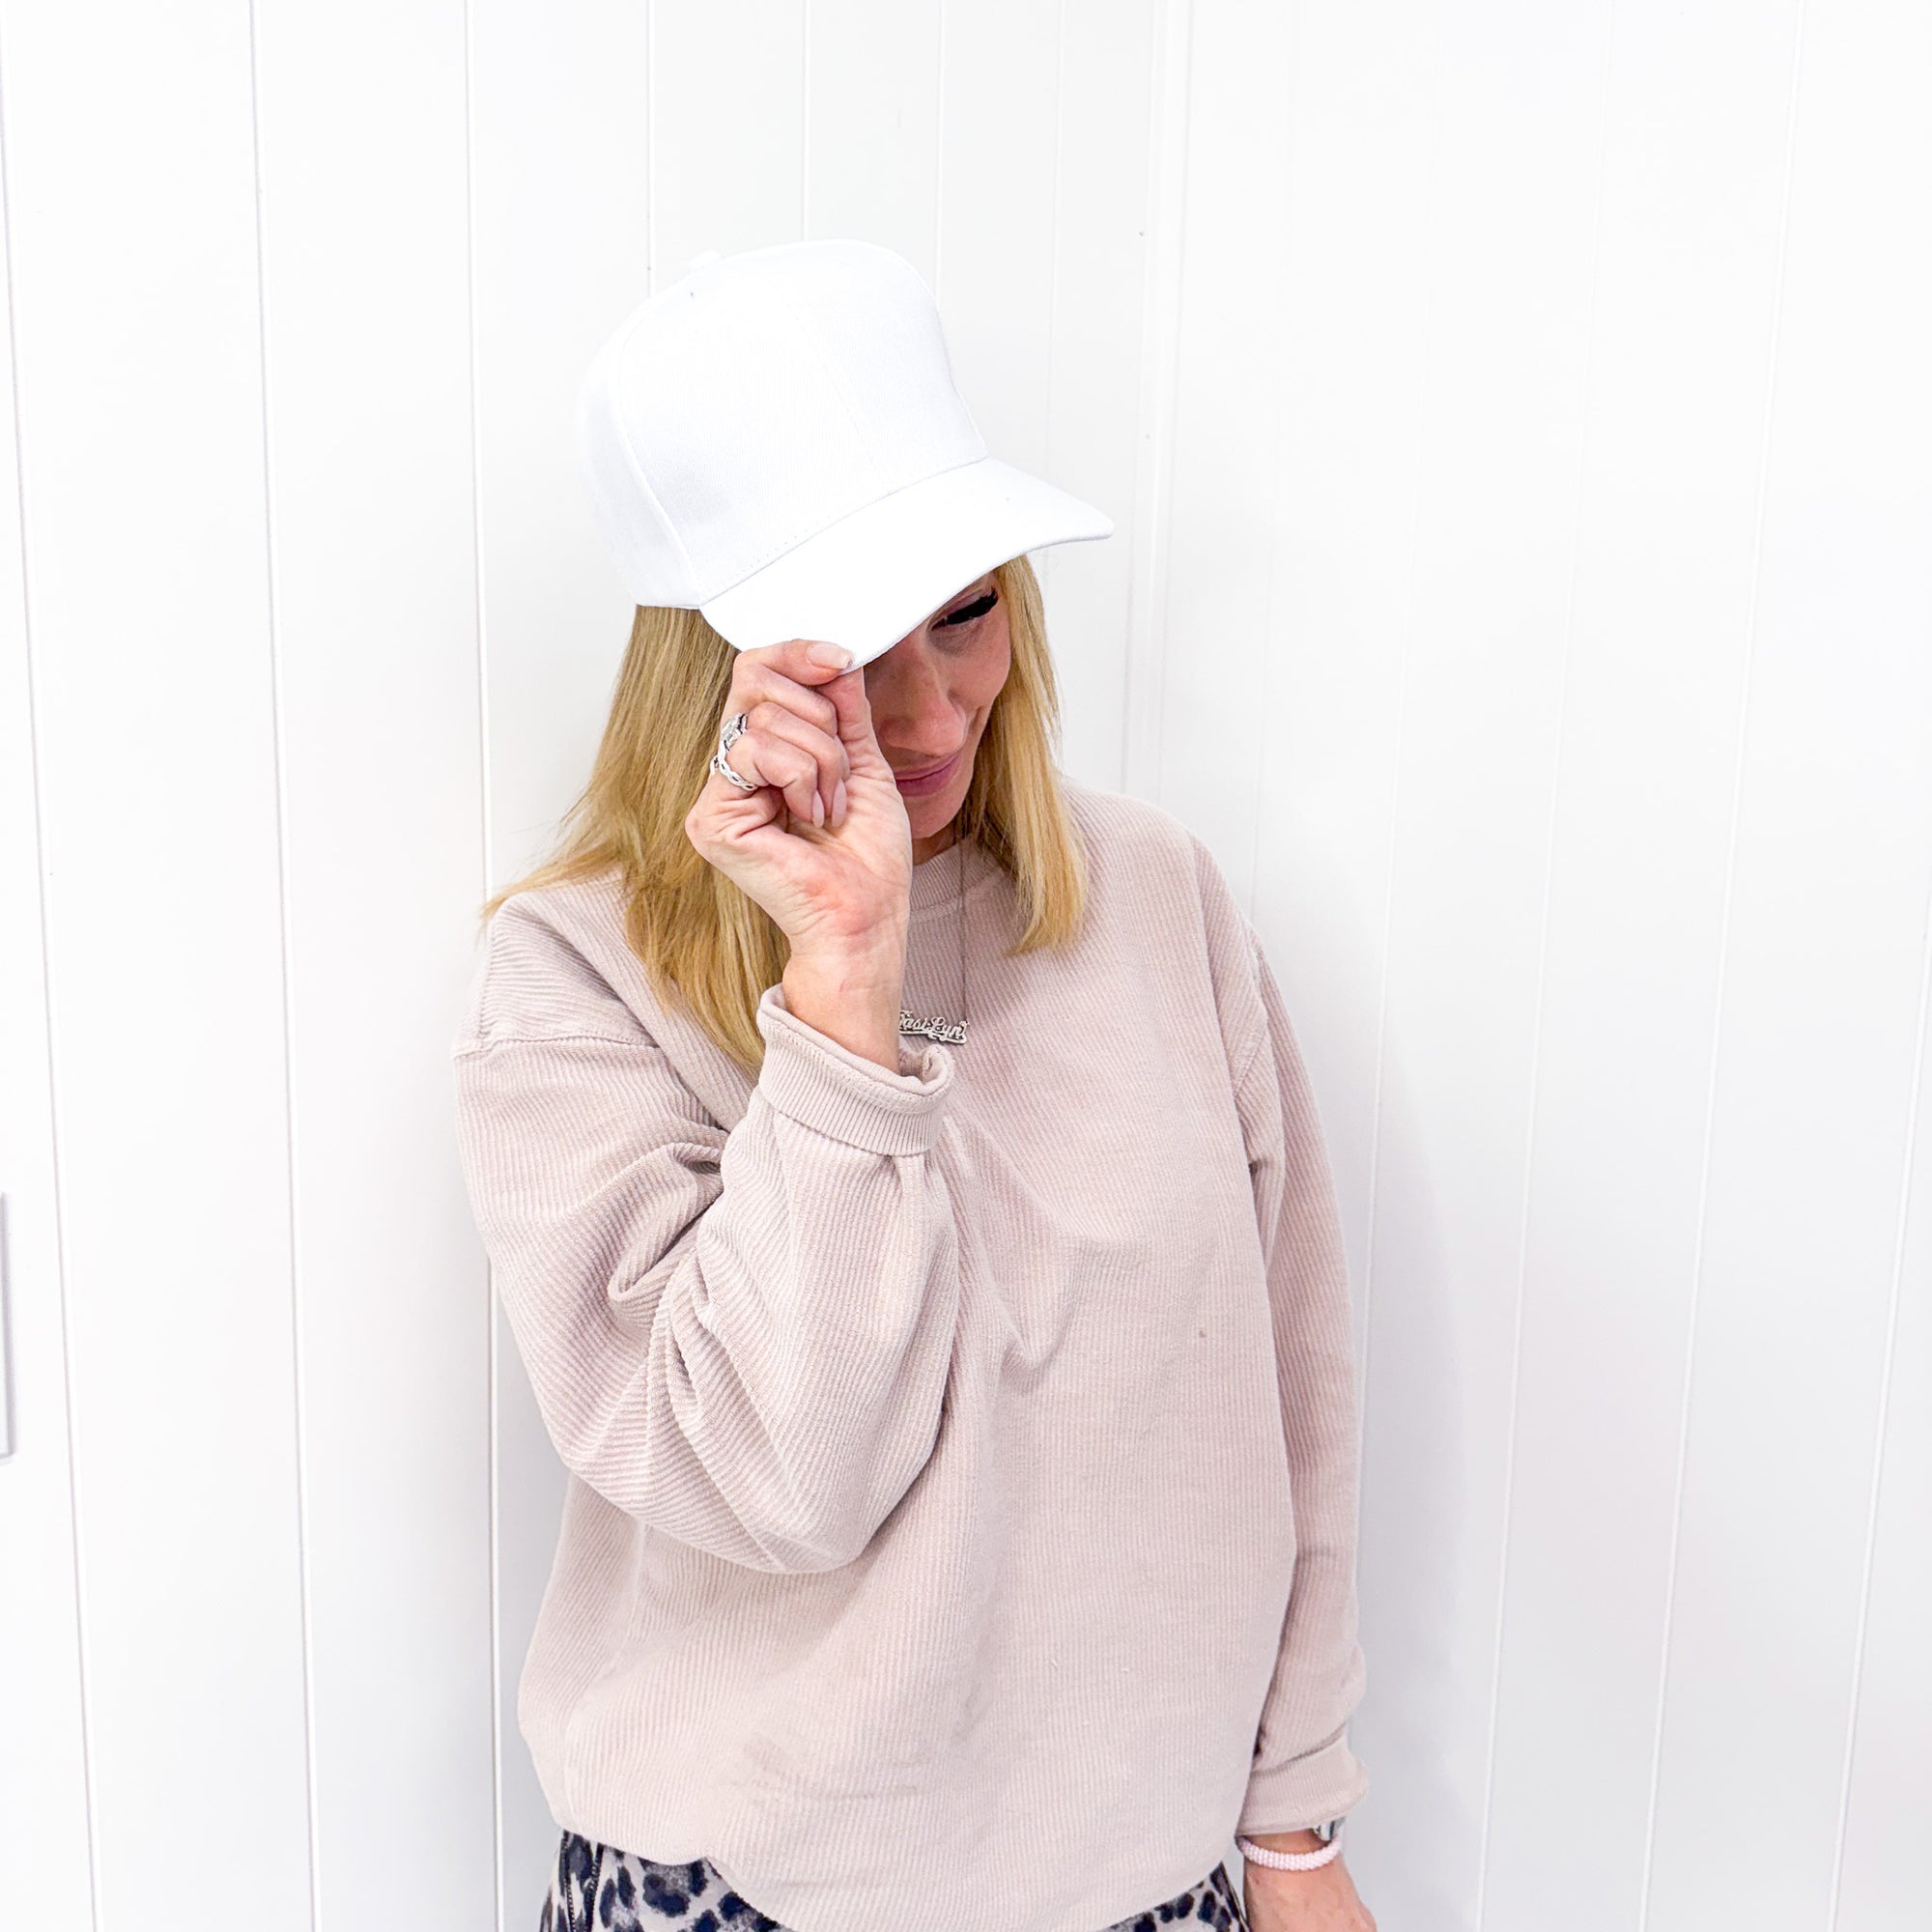 Basic Babe Ball Cap in White - Boujee Boutique 